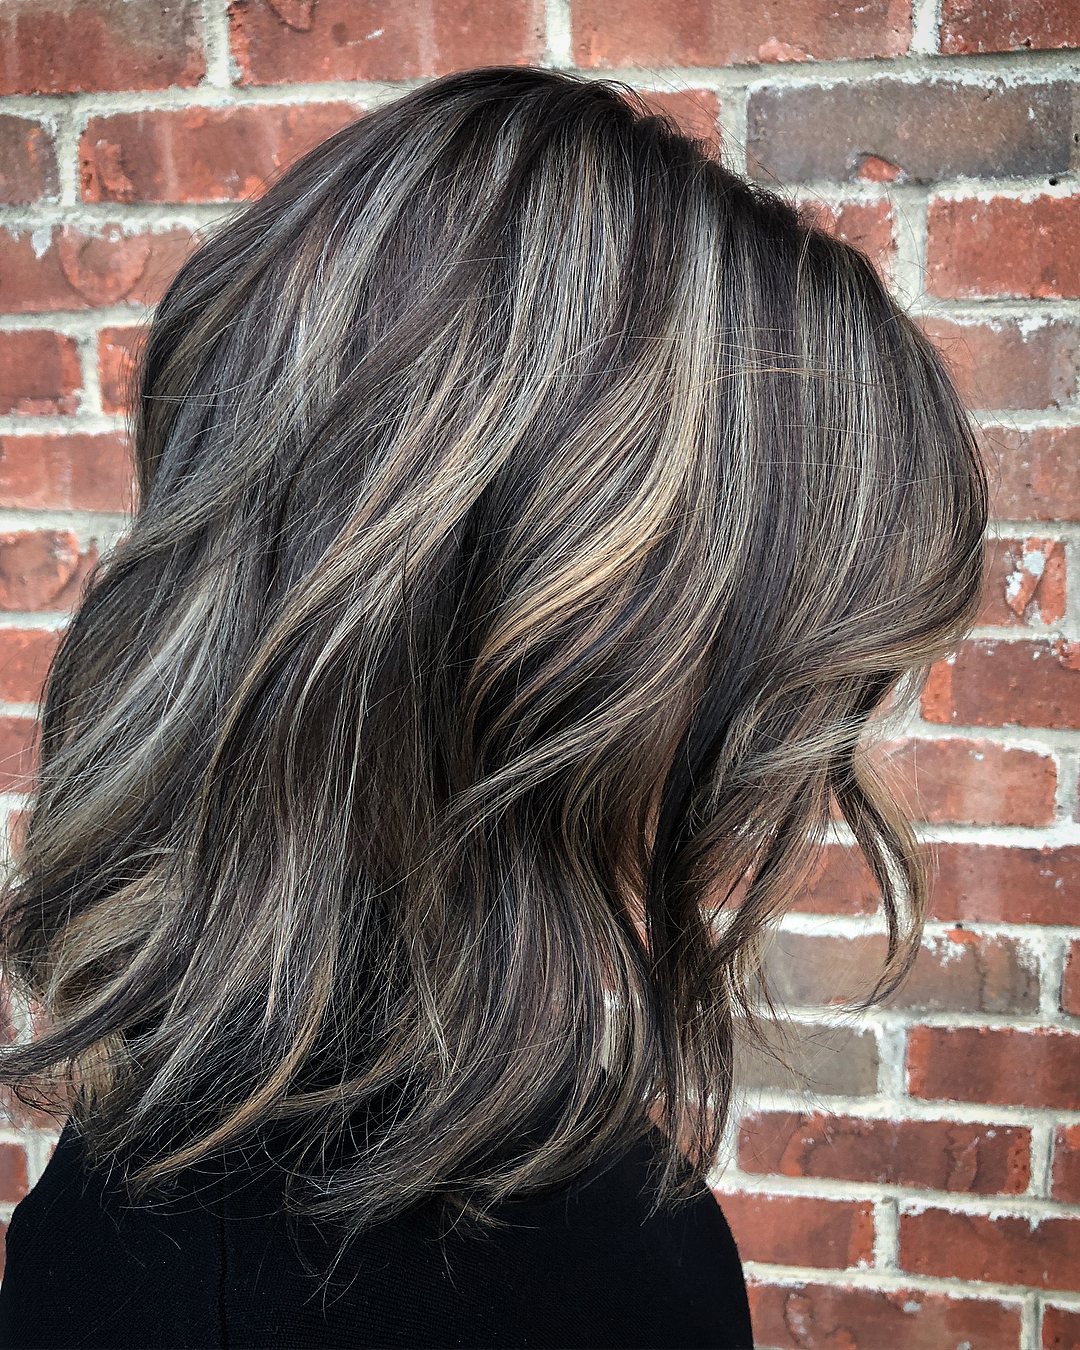 Brunette Hair With Silver Balayage